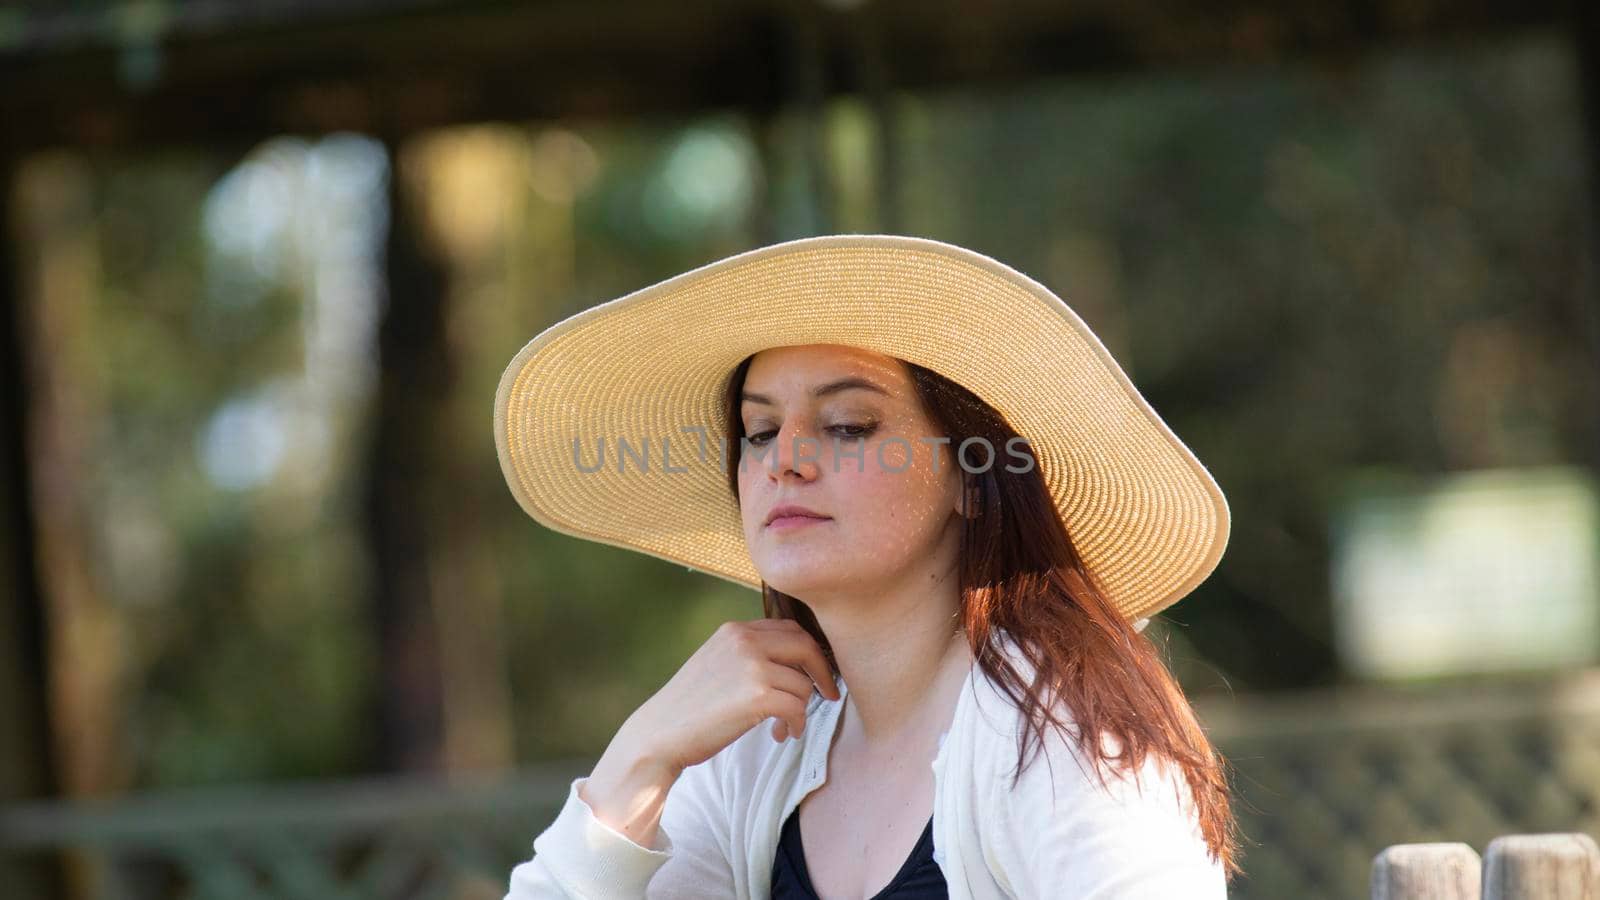 Portrait of beautiful long-haired Hispanic young woman wearing a hat sitting on a park bench with a pensive attitude against a background of unfocused green trees during sunset